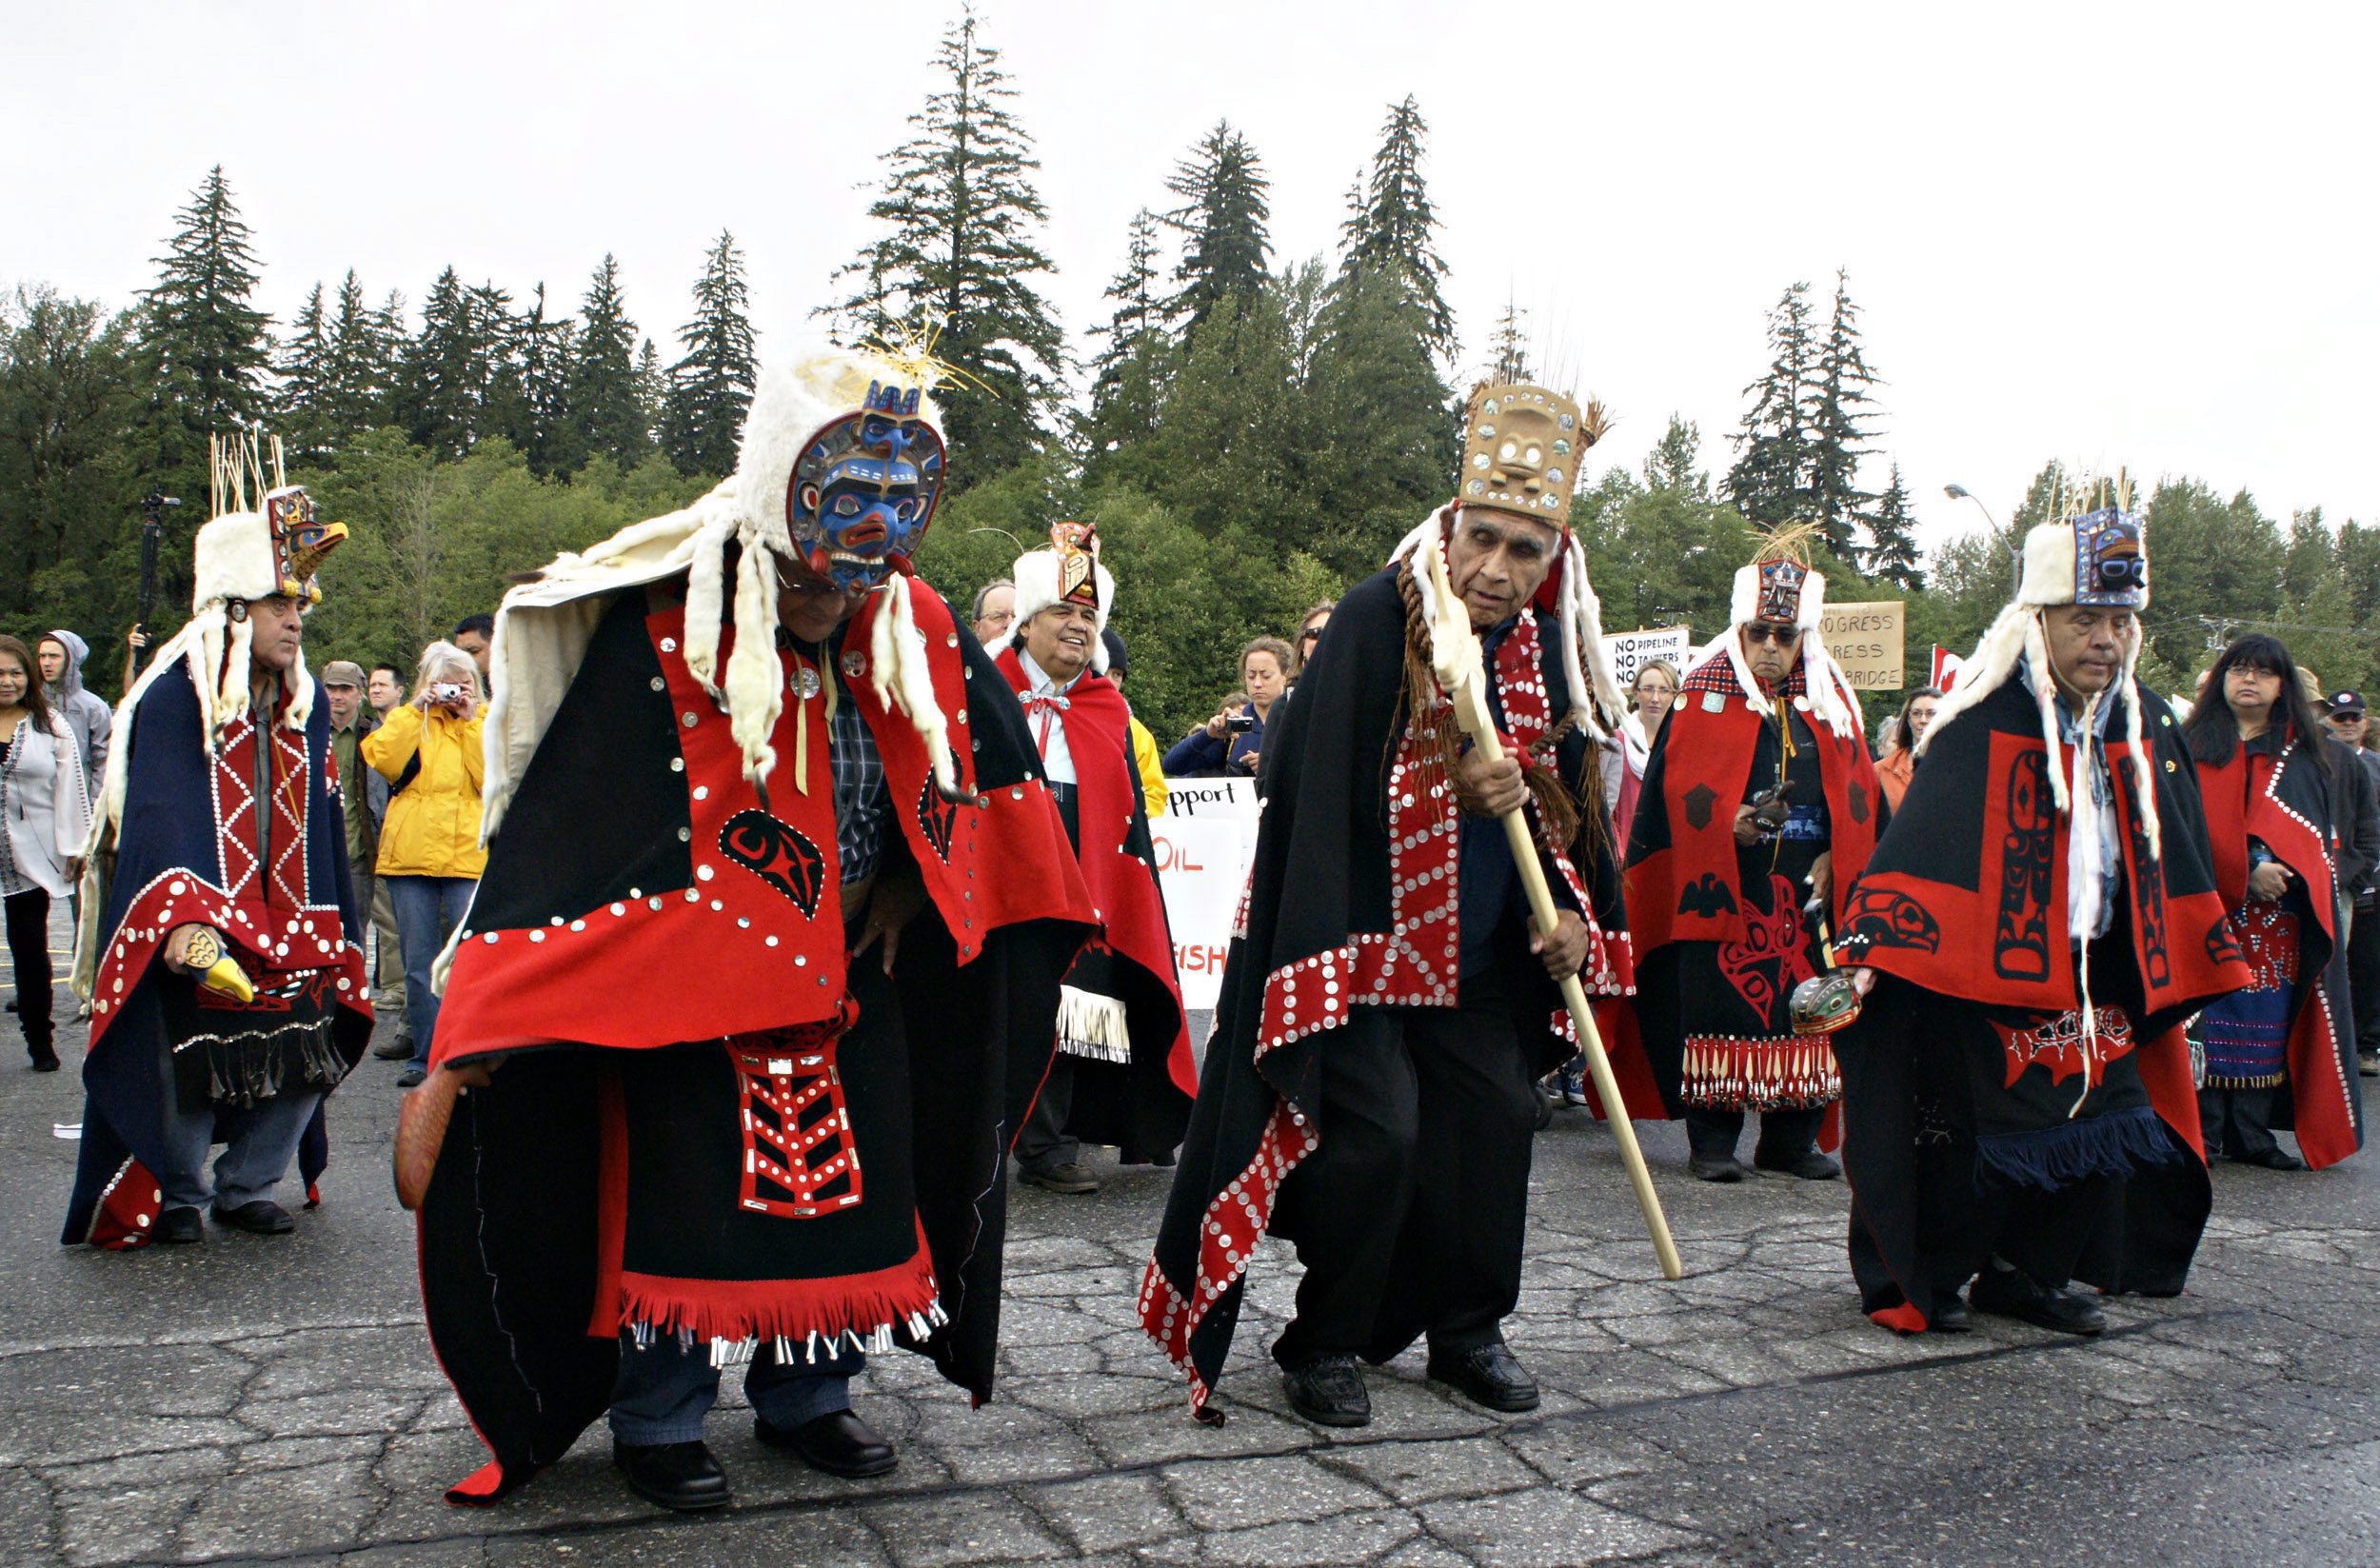 Traditional chiefs from the Heilsuk First Nation in Bella Bella, BC, lead a protest rally with a dance in Kitimat, BC, Tuesday, August 31, 2010.